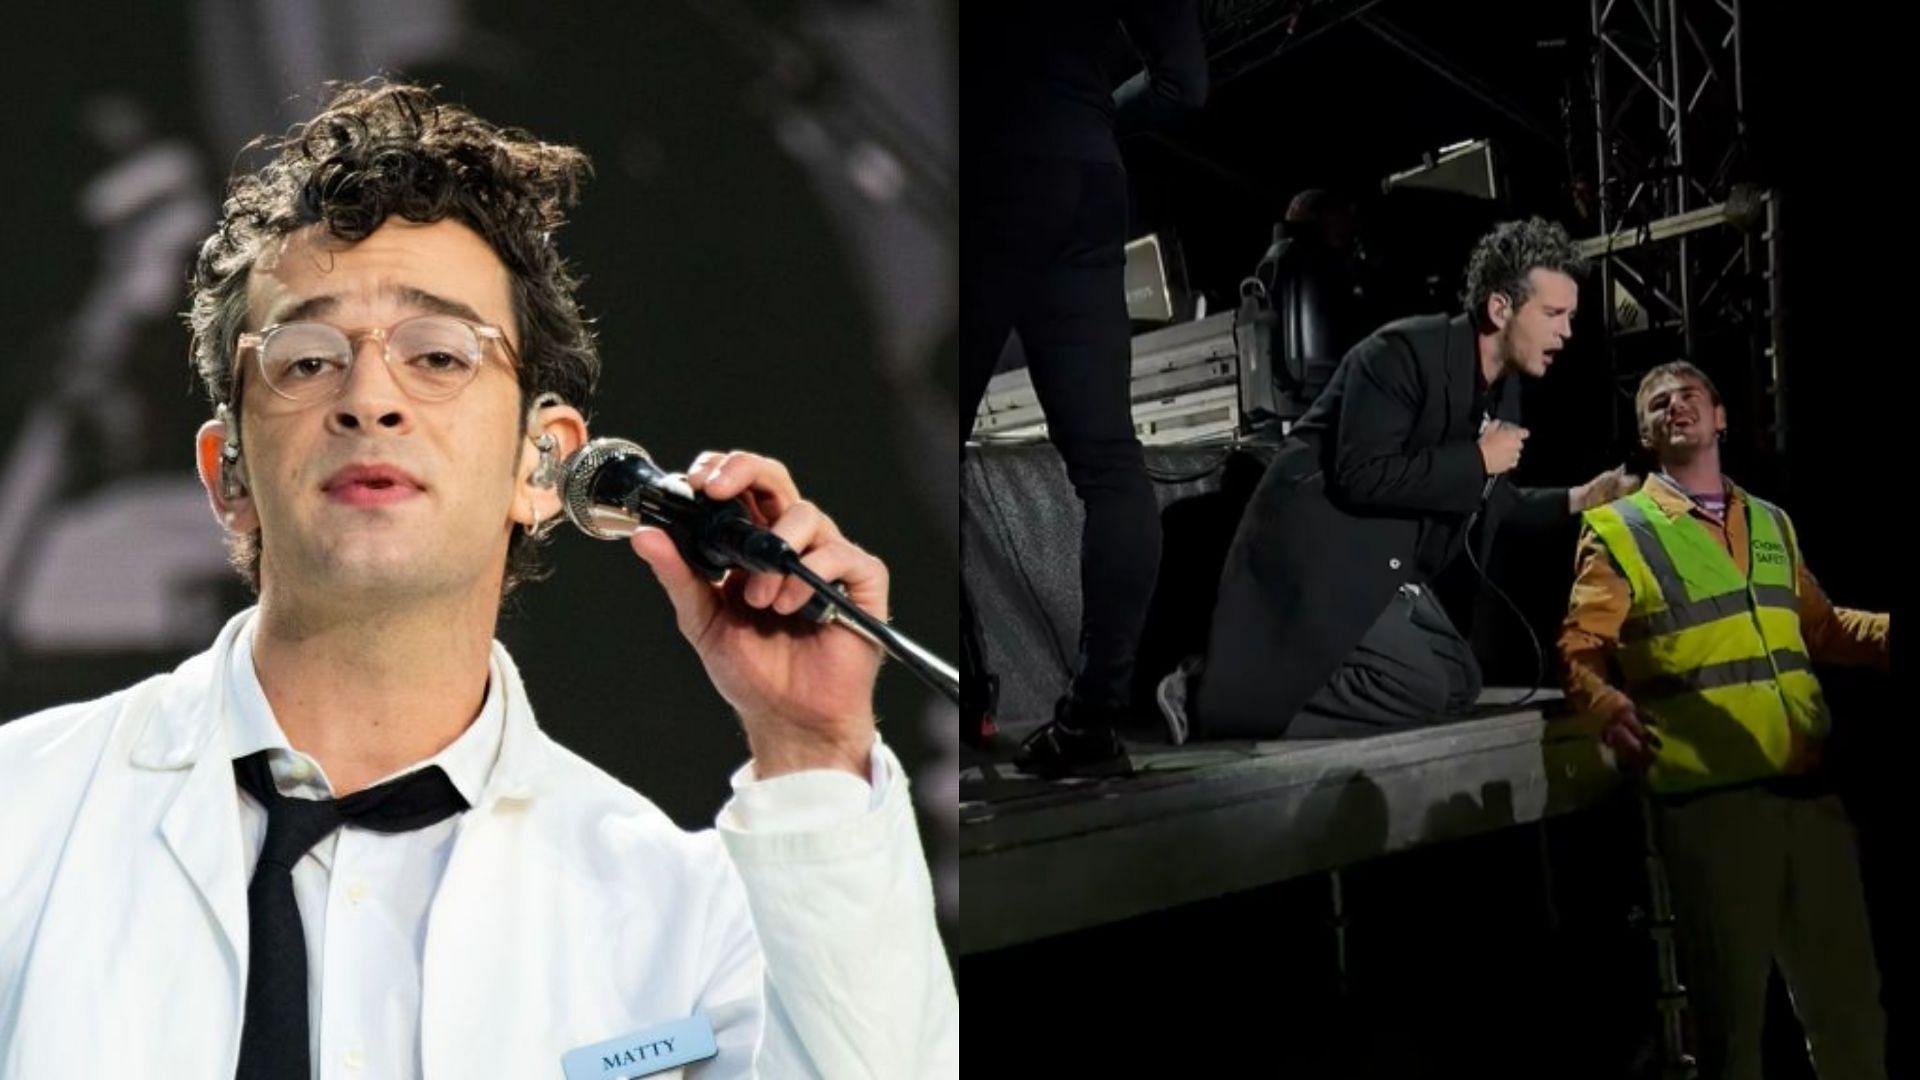 Matty Healy kissed a security guard during a concert. (Image via Getty Images, Twitter/@RapAccess)